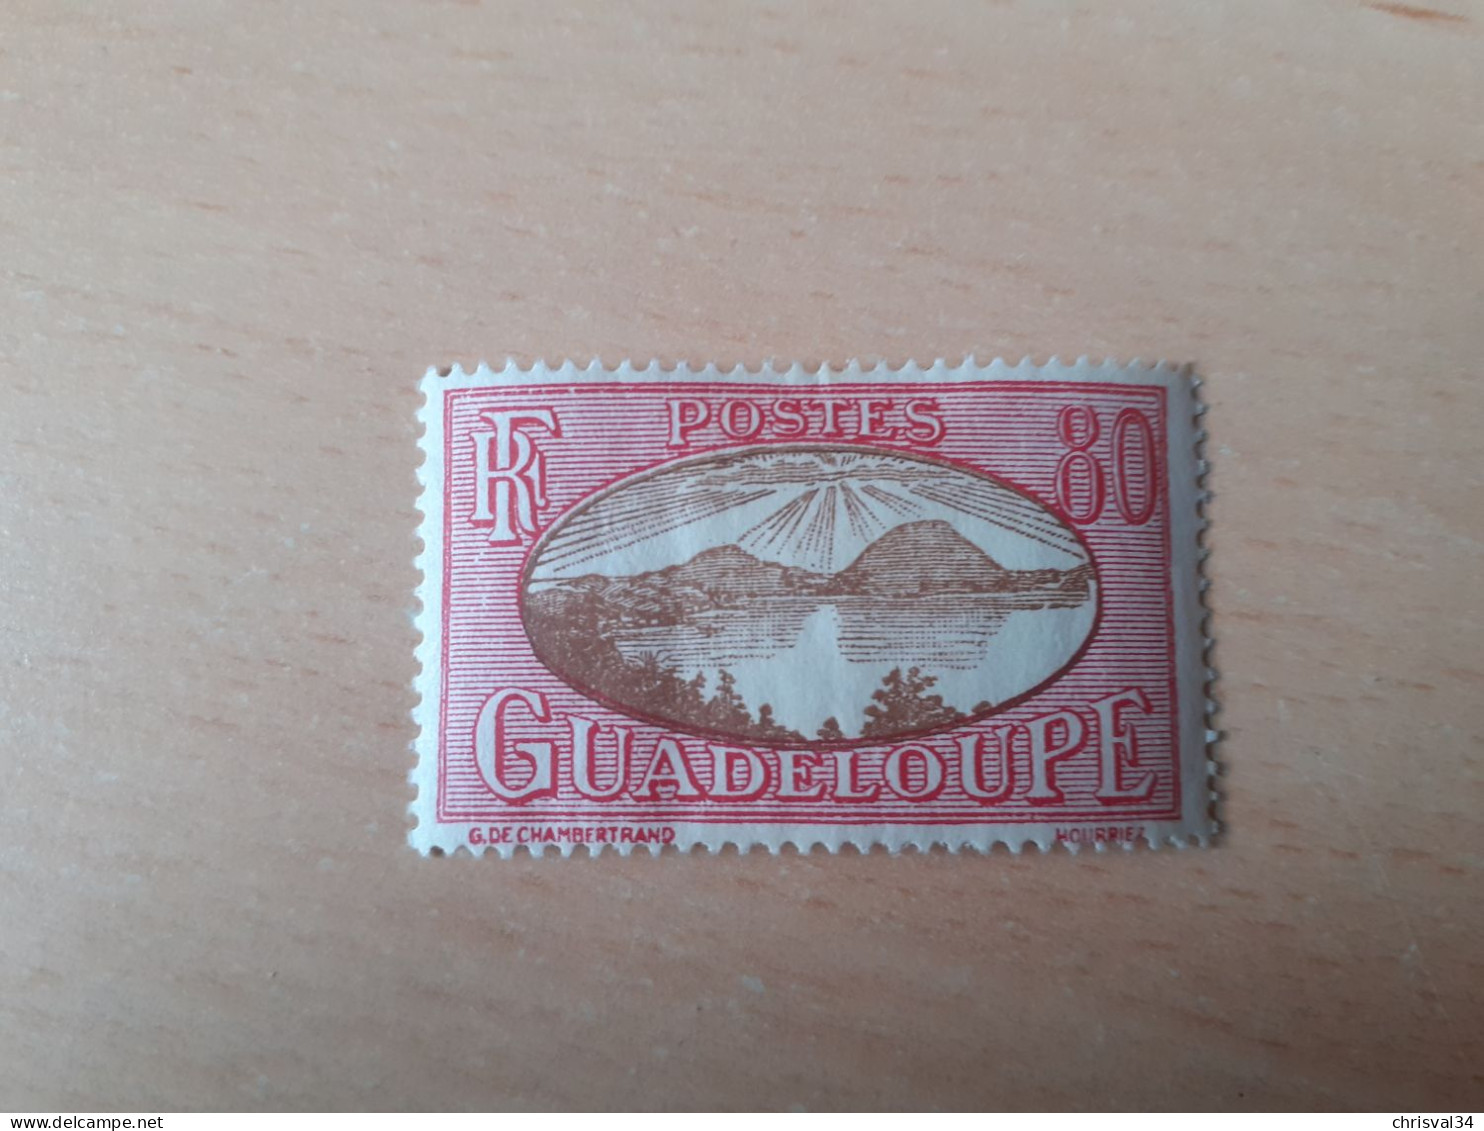 TIMBRE   GUADELOUPE       N  112A     COTE  1,00   EUROS  NEUF  TRACE  CHARNIERE - Neufs